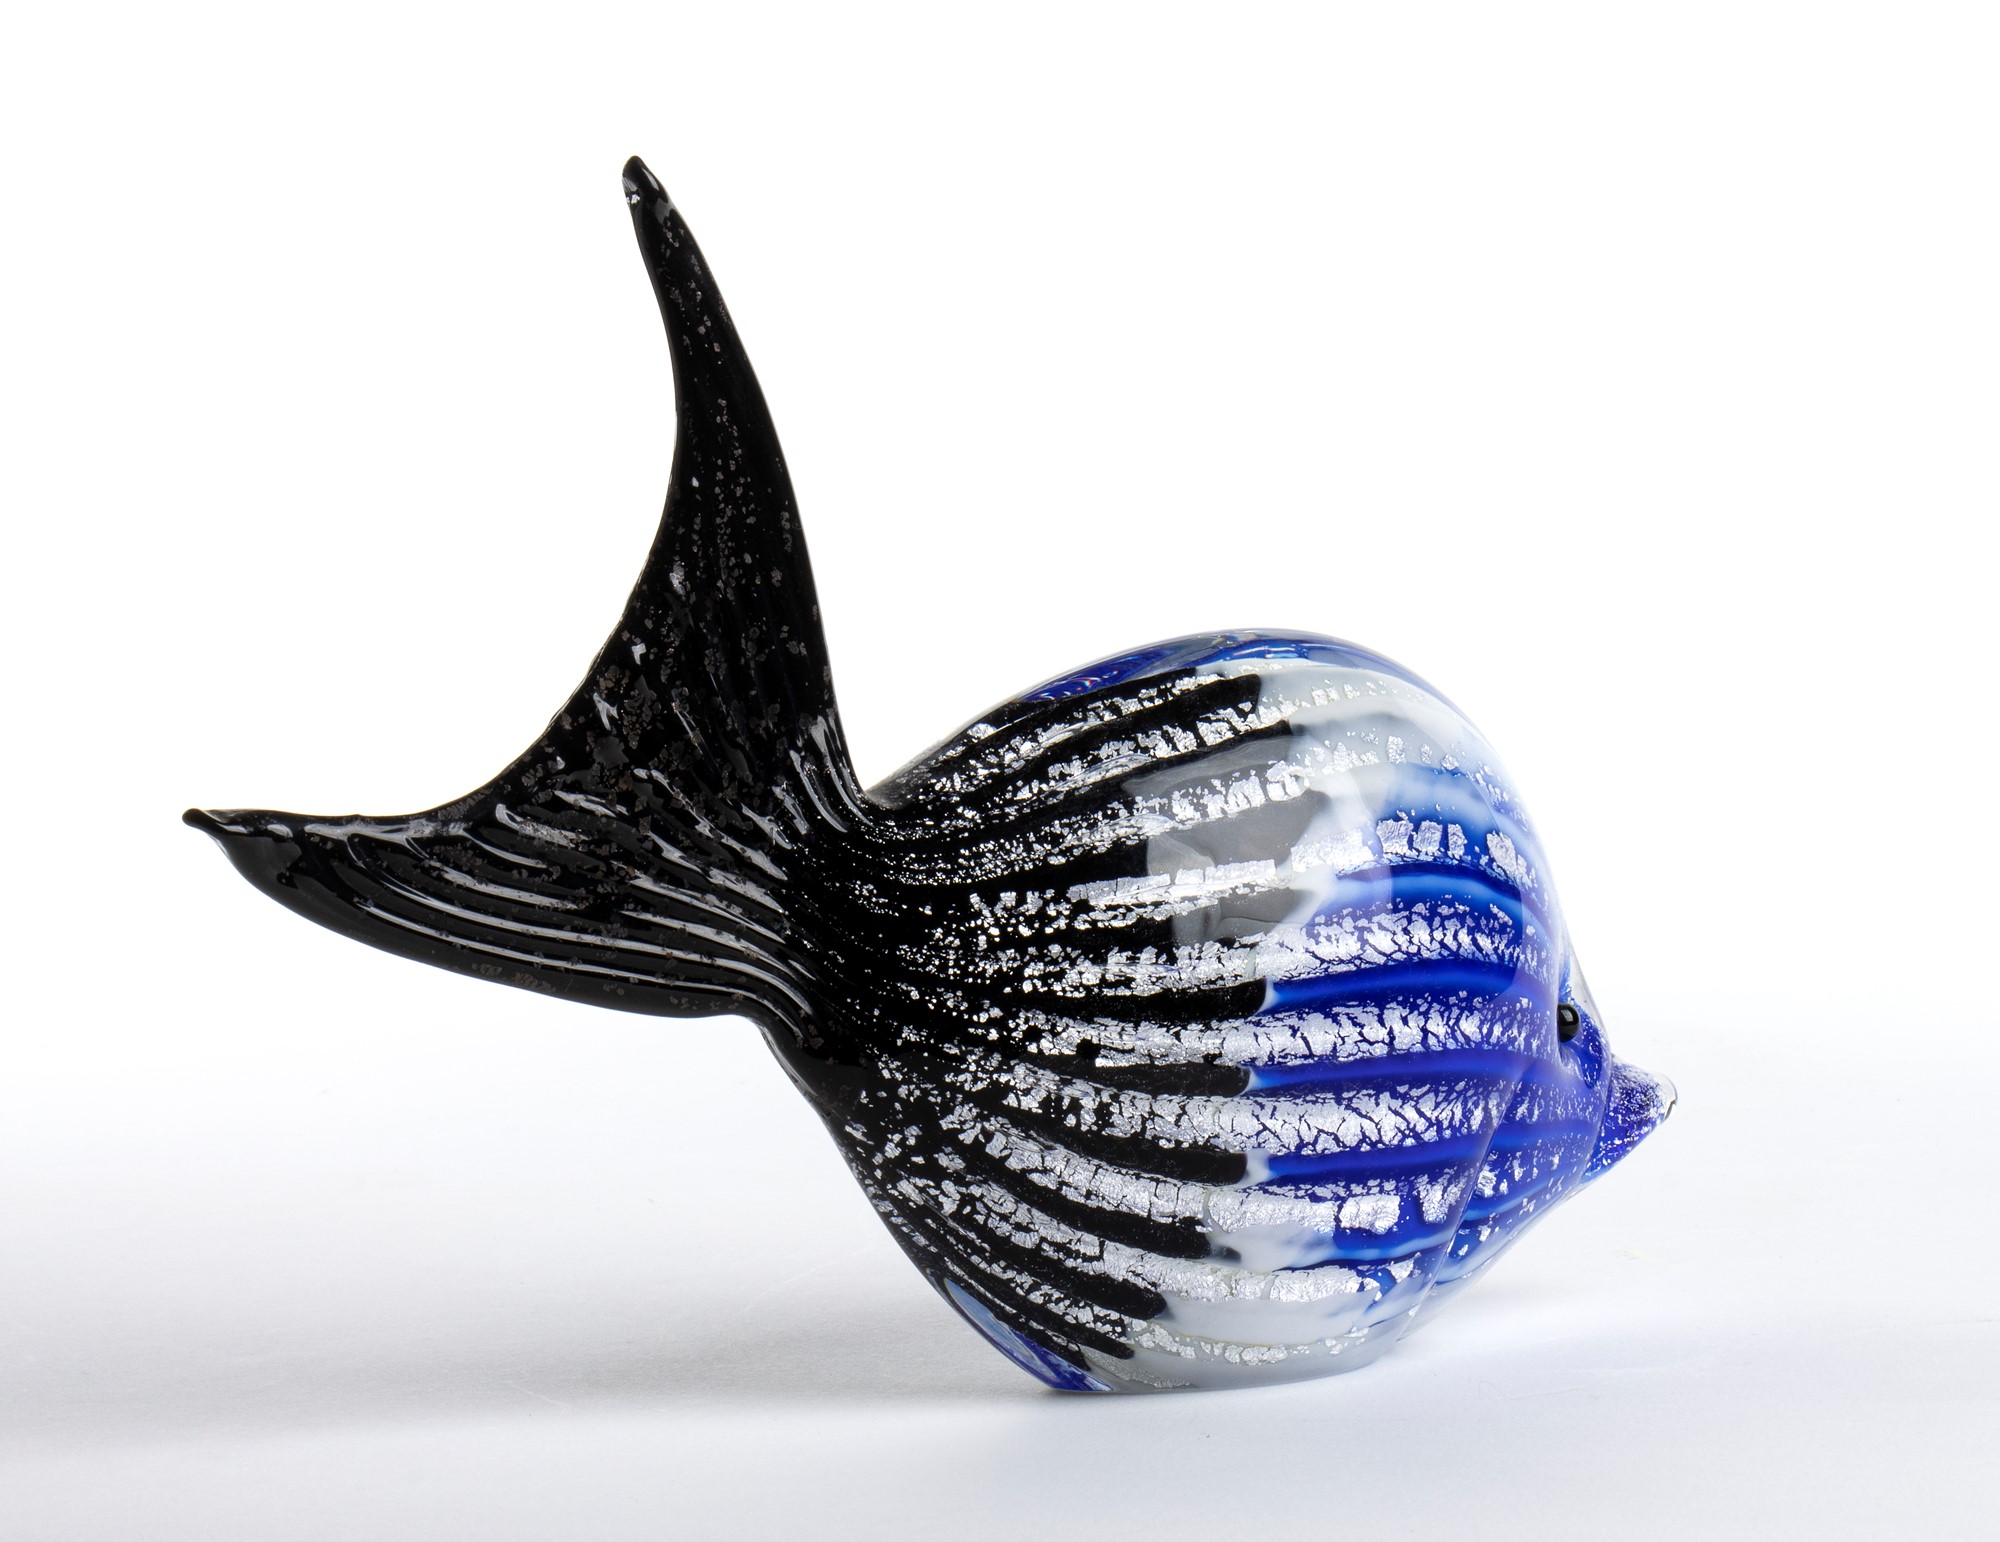 Small fish-shaped sculpture in Murano glass - Image 10 of 11